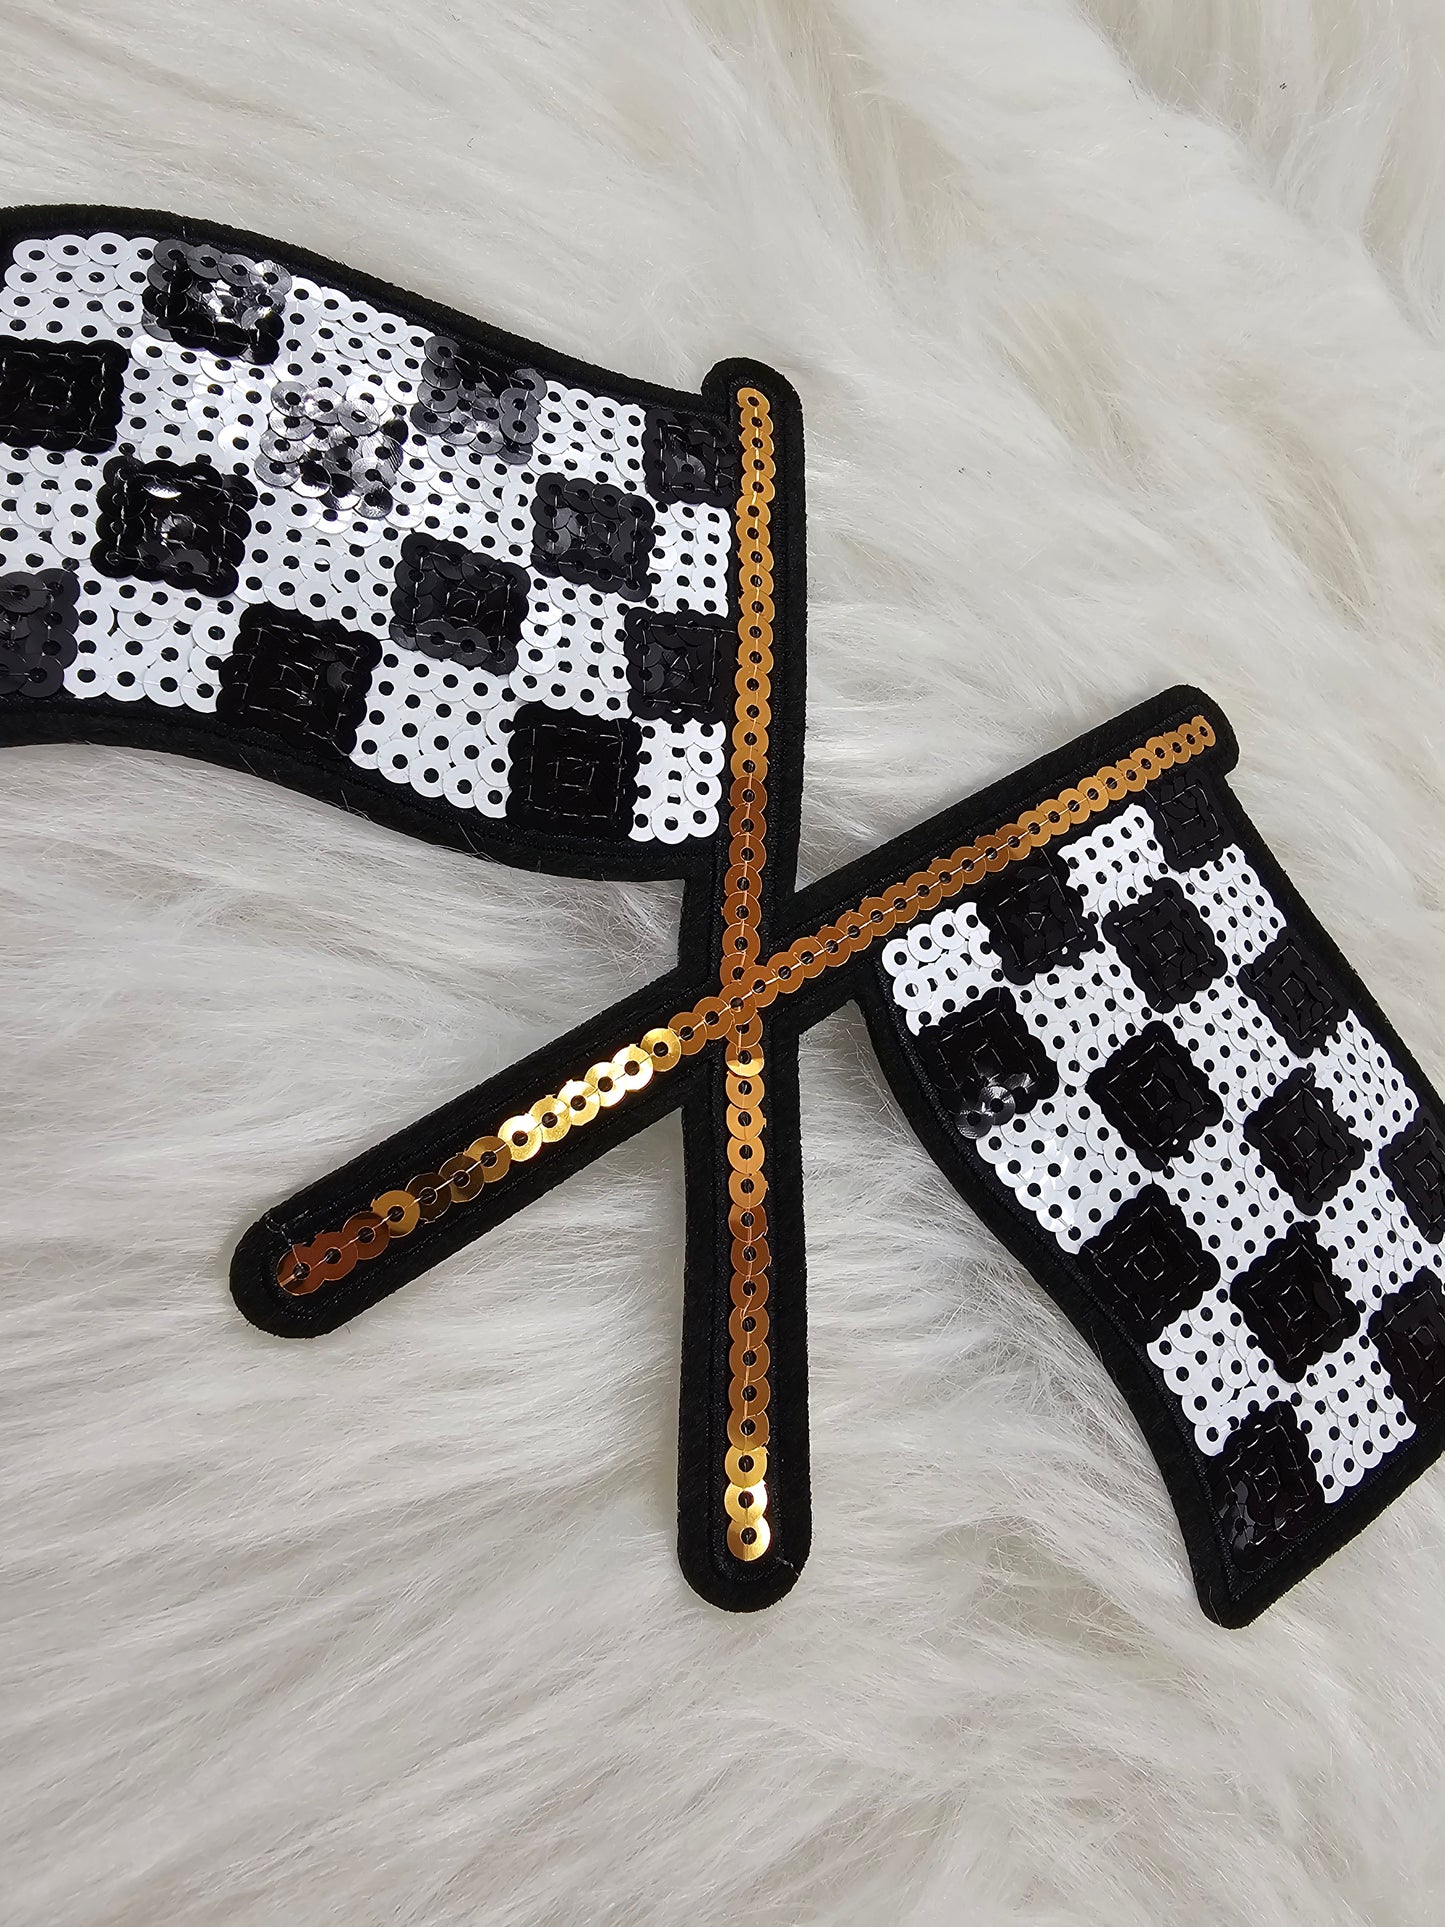 Racing Checkered Flag Sequin Iron On Patch